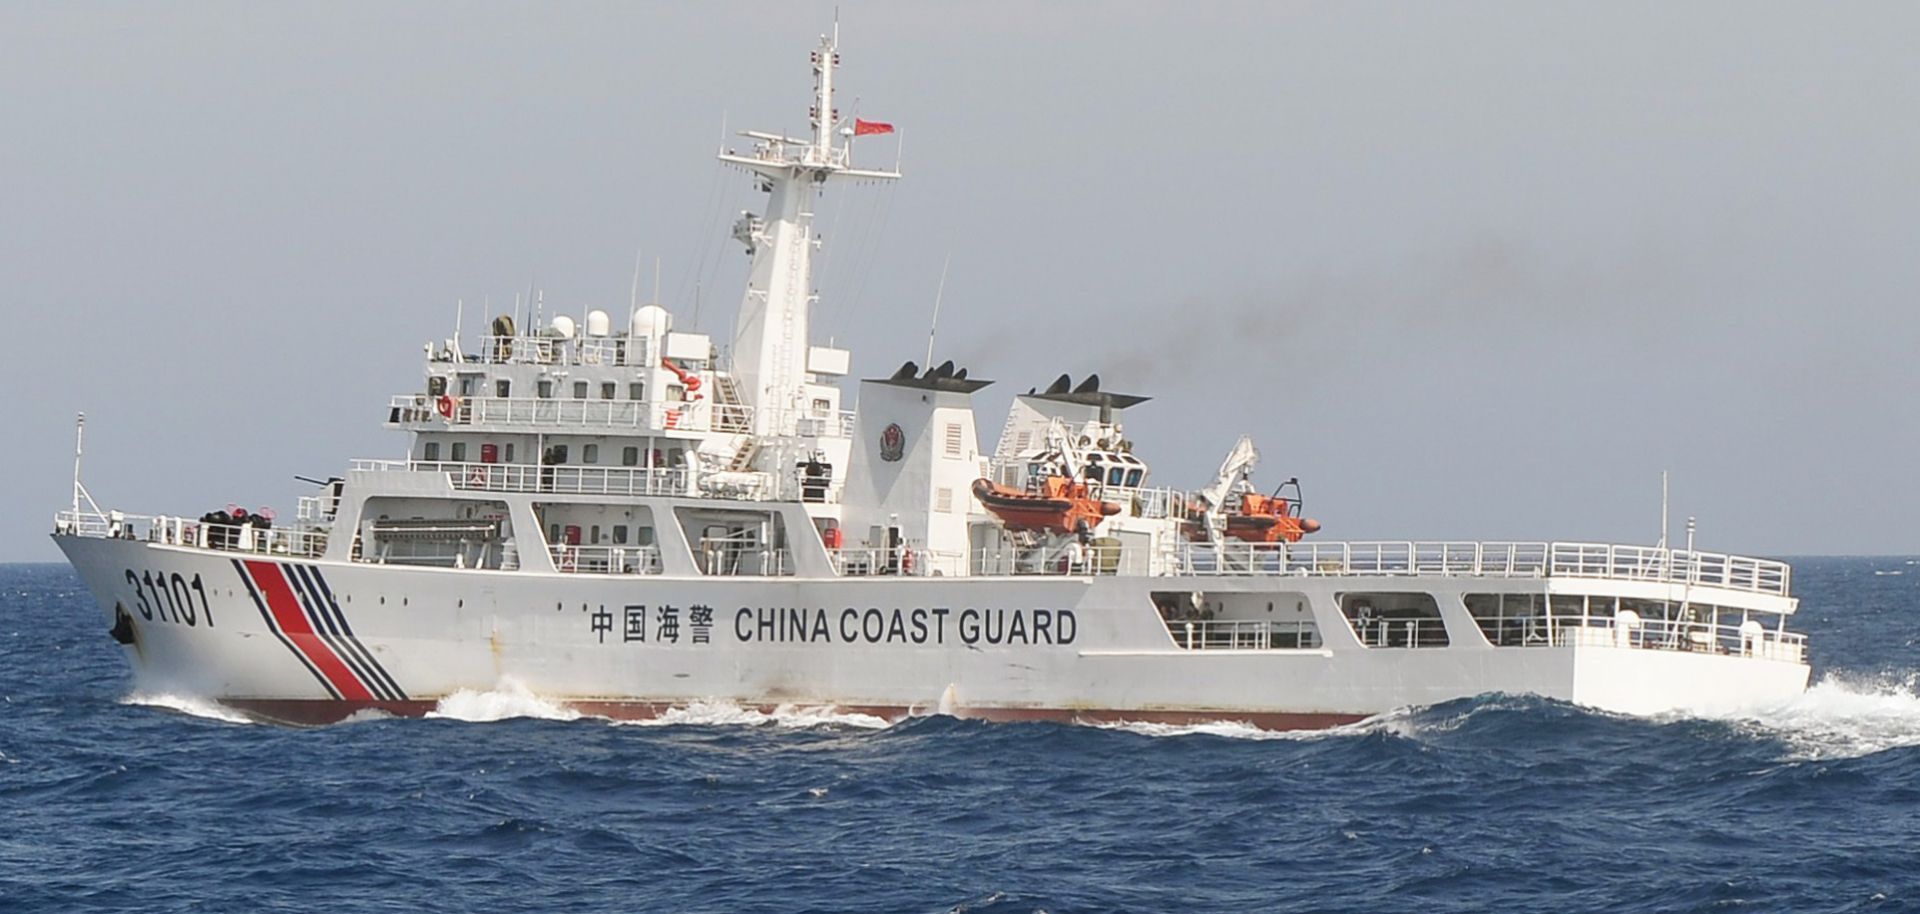 Cooperation as a Means to All Ends in the South China Sea